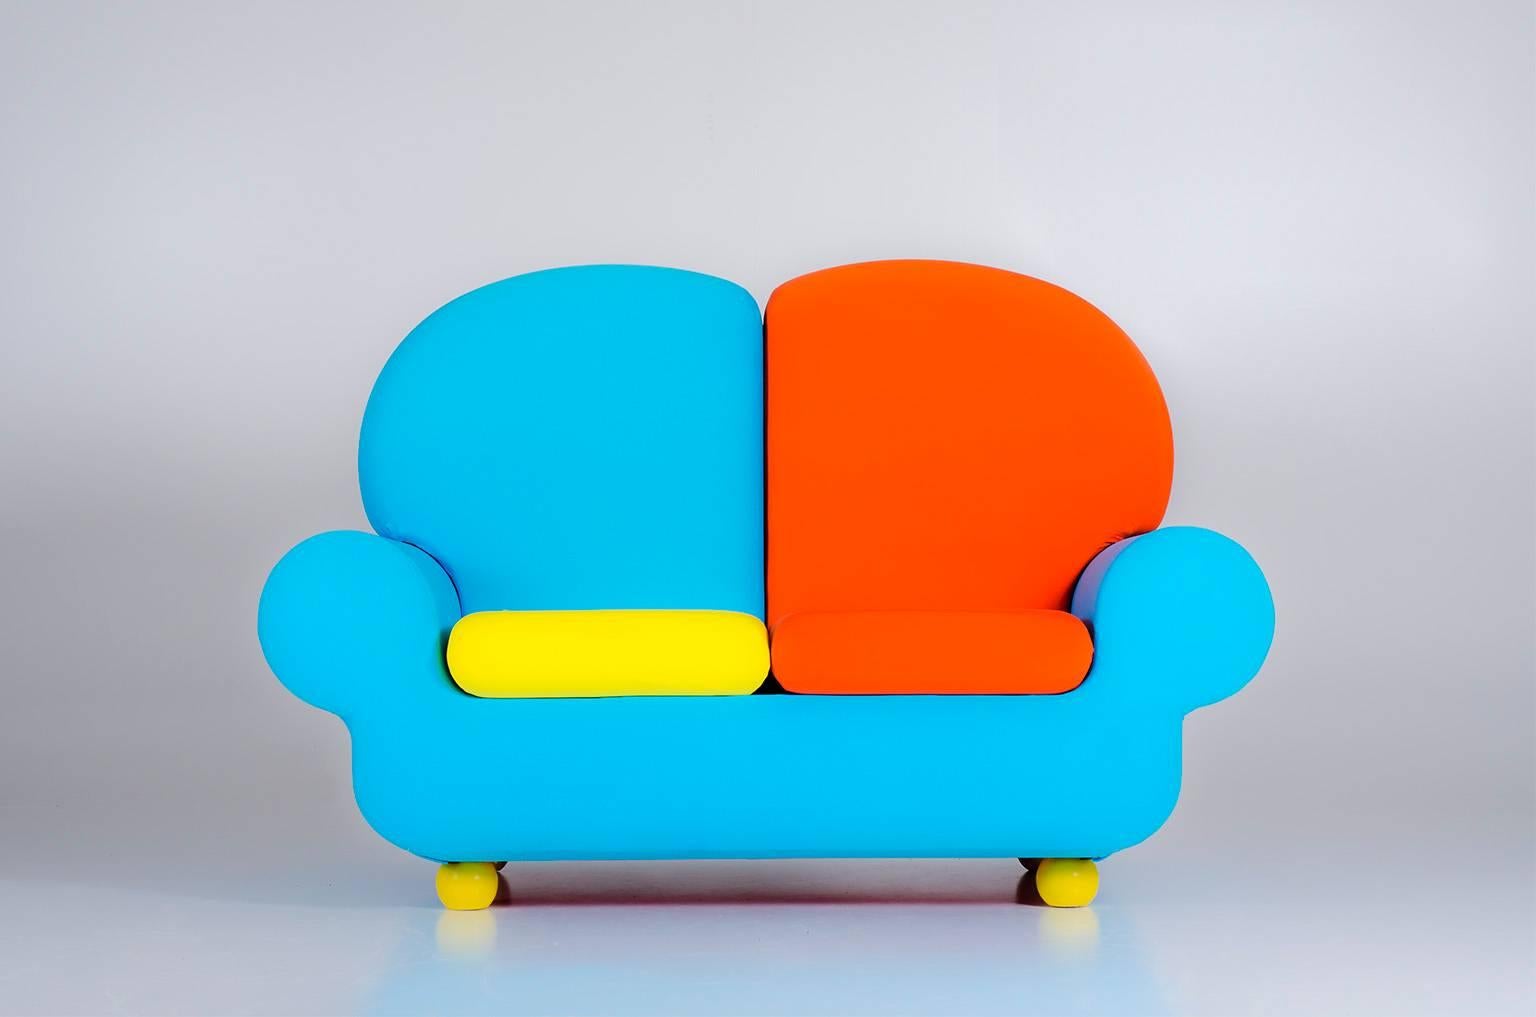 Papi colors is roundish, cosy and soft, like the childhood yellow bathducks, but to the adults eyes is irreverent an ironic: a communication tool of individual protest.
Structure and insert made of steel.
Differentiated lift polyurethane foam